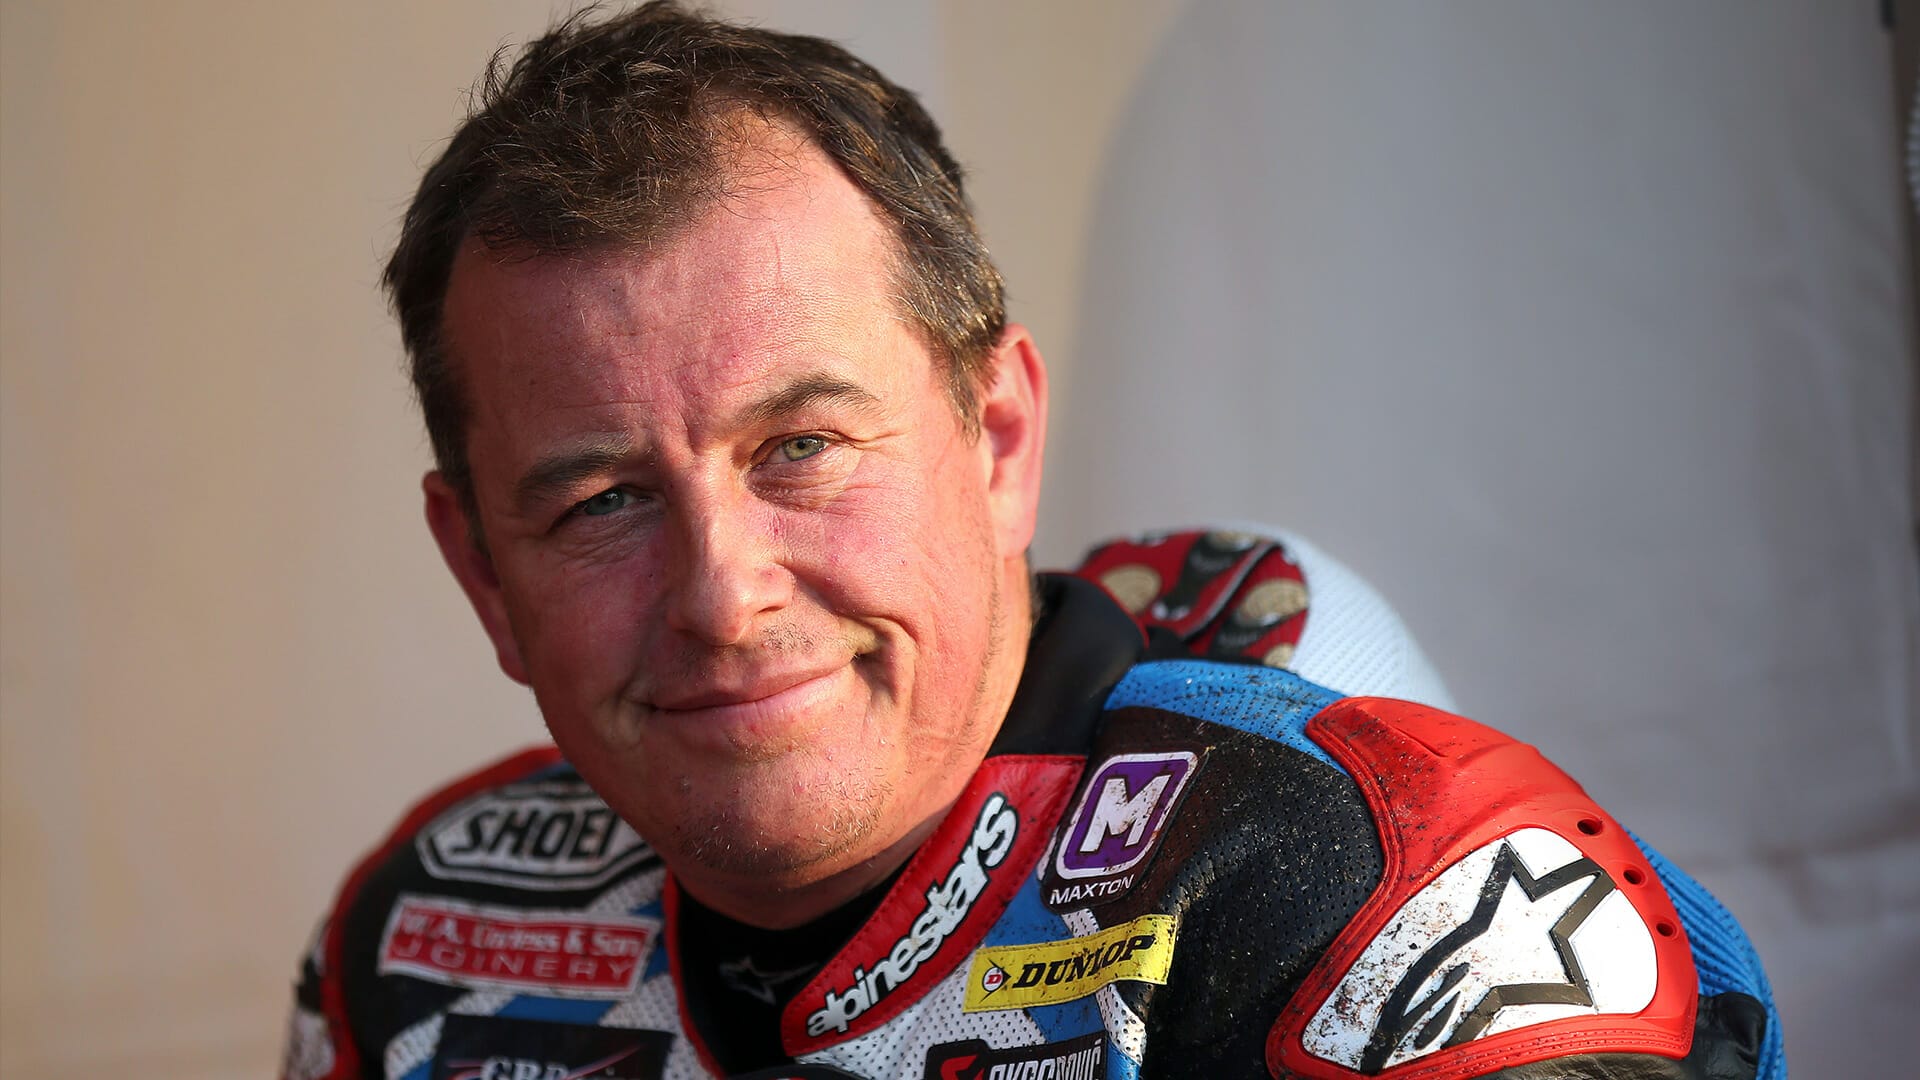 John #McGuinness in a new team on the Isle of Man TT #IOMTT
- also in the app MOTORCYCLE NEWS